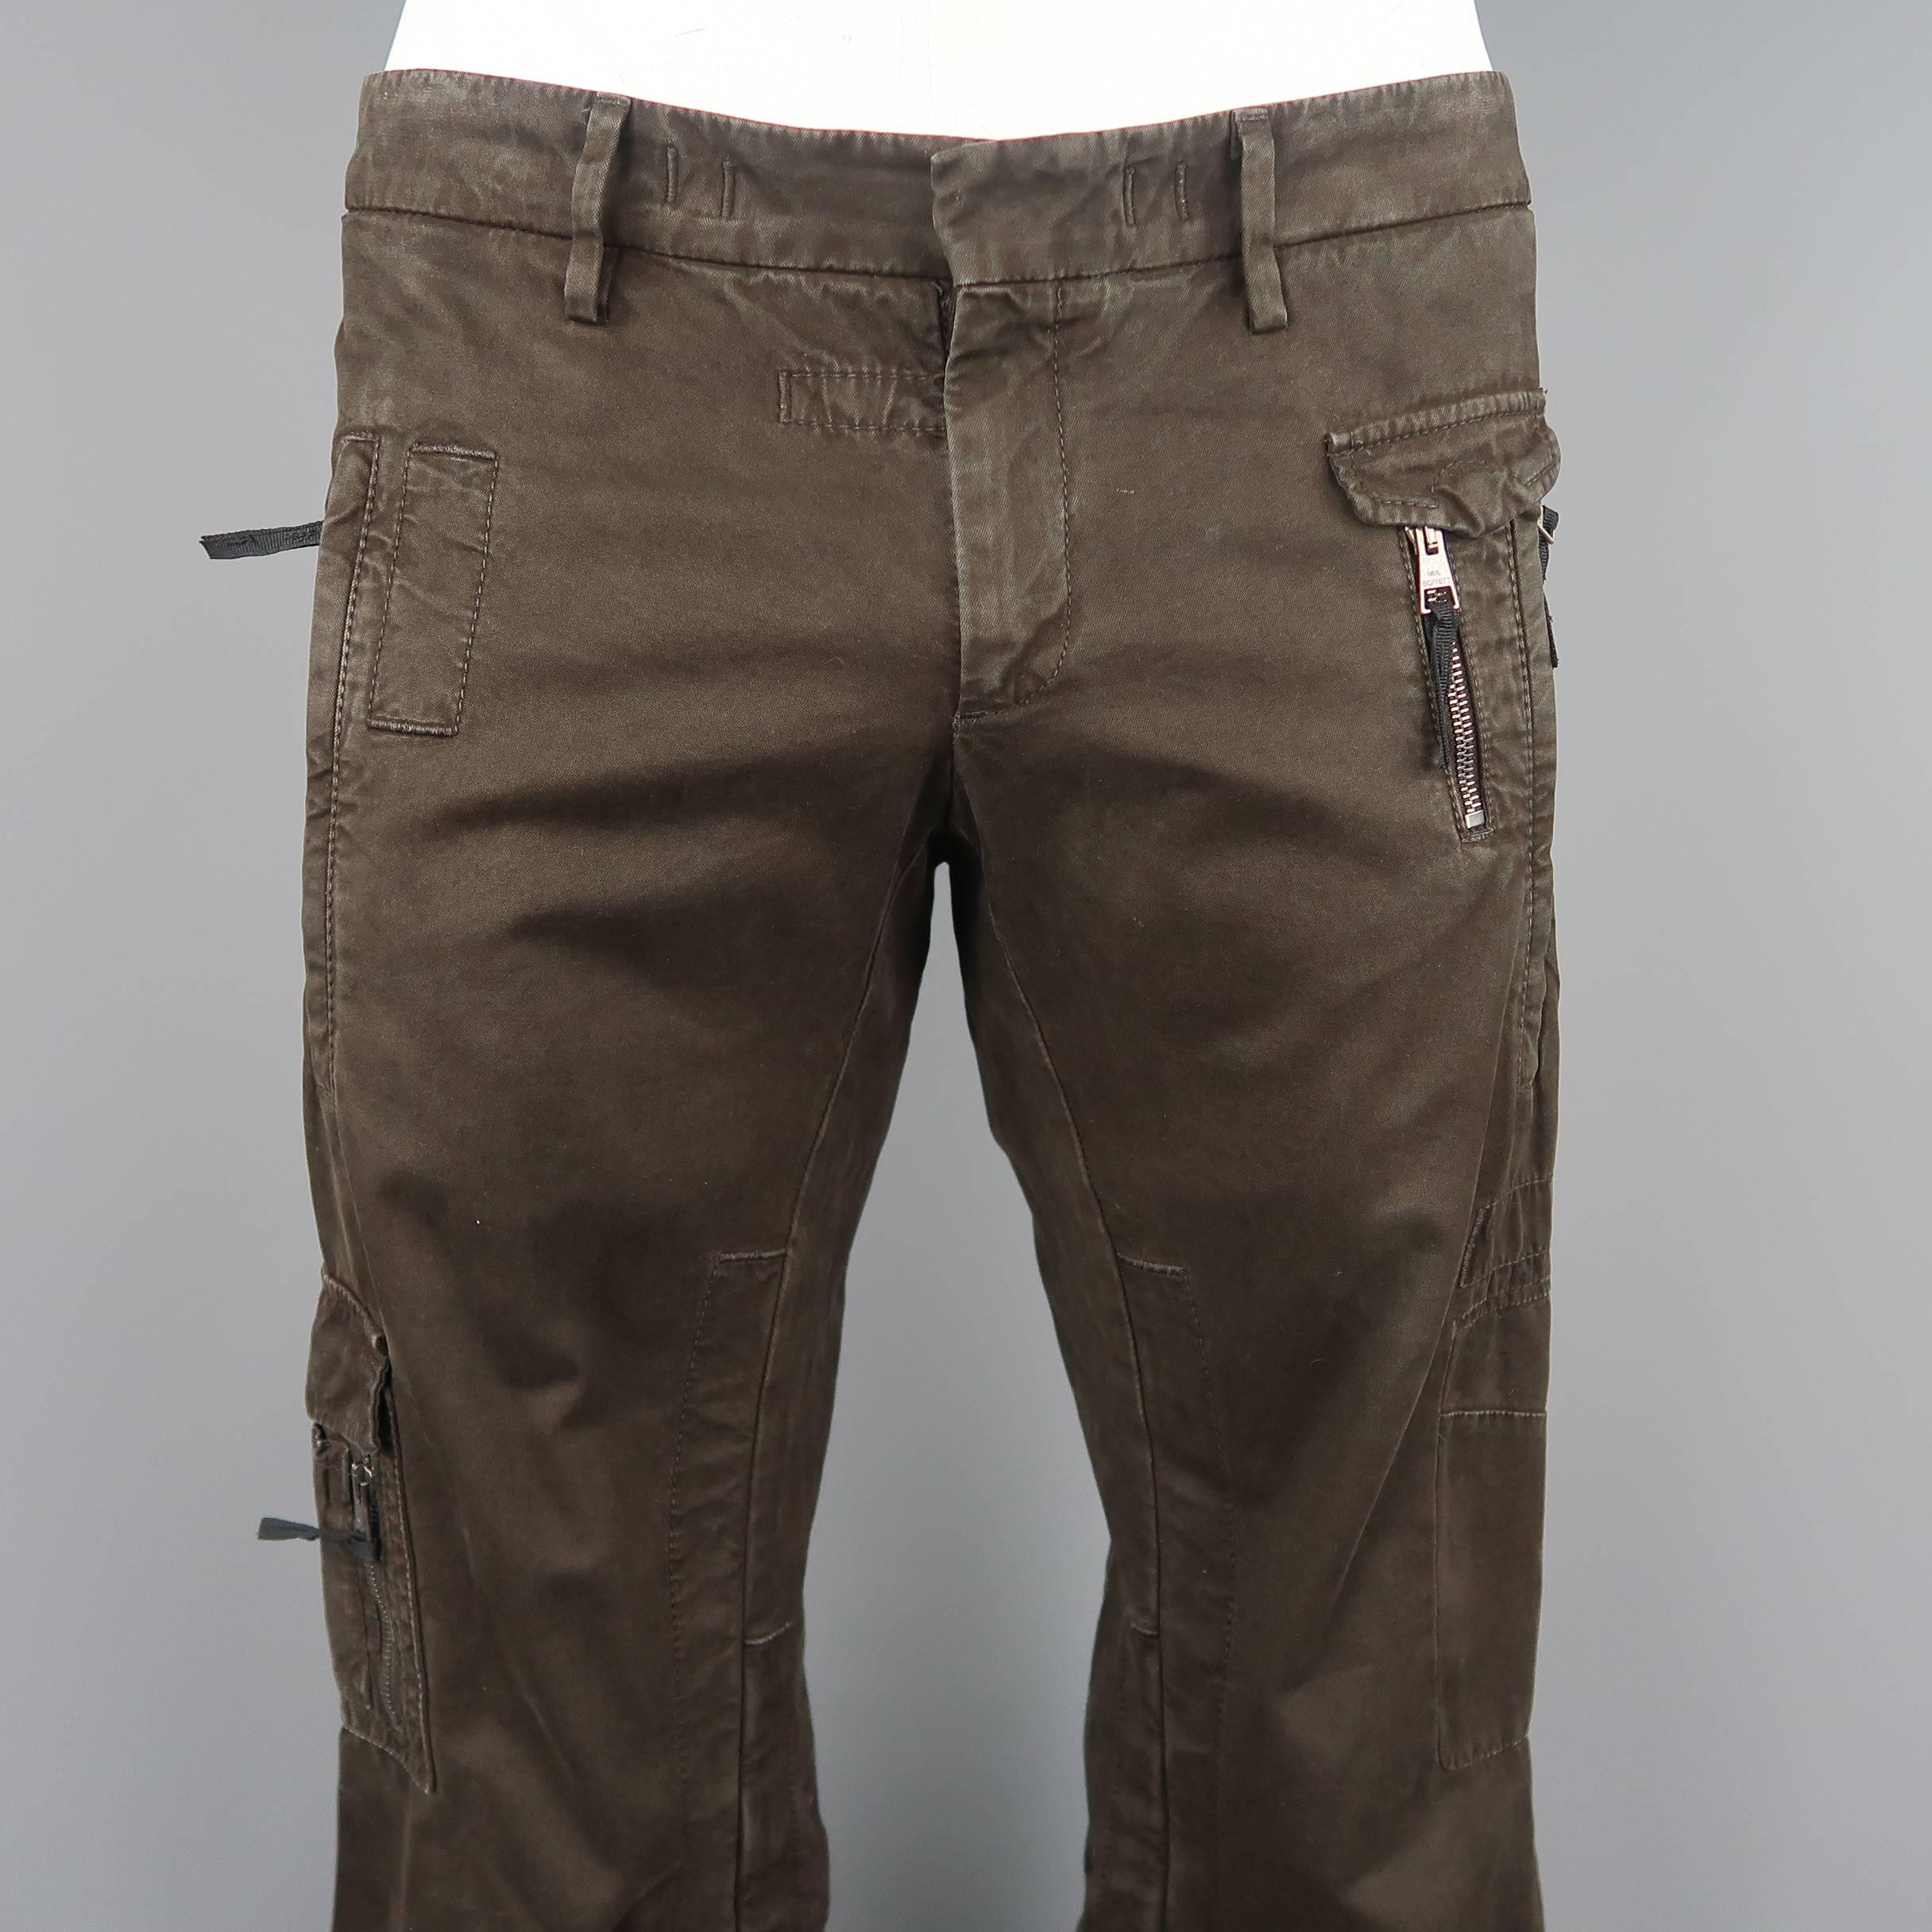 Neil Barrett pants come in chocolate brown cotton canvas with zip and cargo pockets. Made in Latvia.
 
Good Pre-Owned Condition.
Marked: IT 48
 
Measurements:
 
Waist: 34 in.
Rise: 11 in.
Inseam: 36 in.
